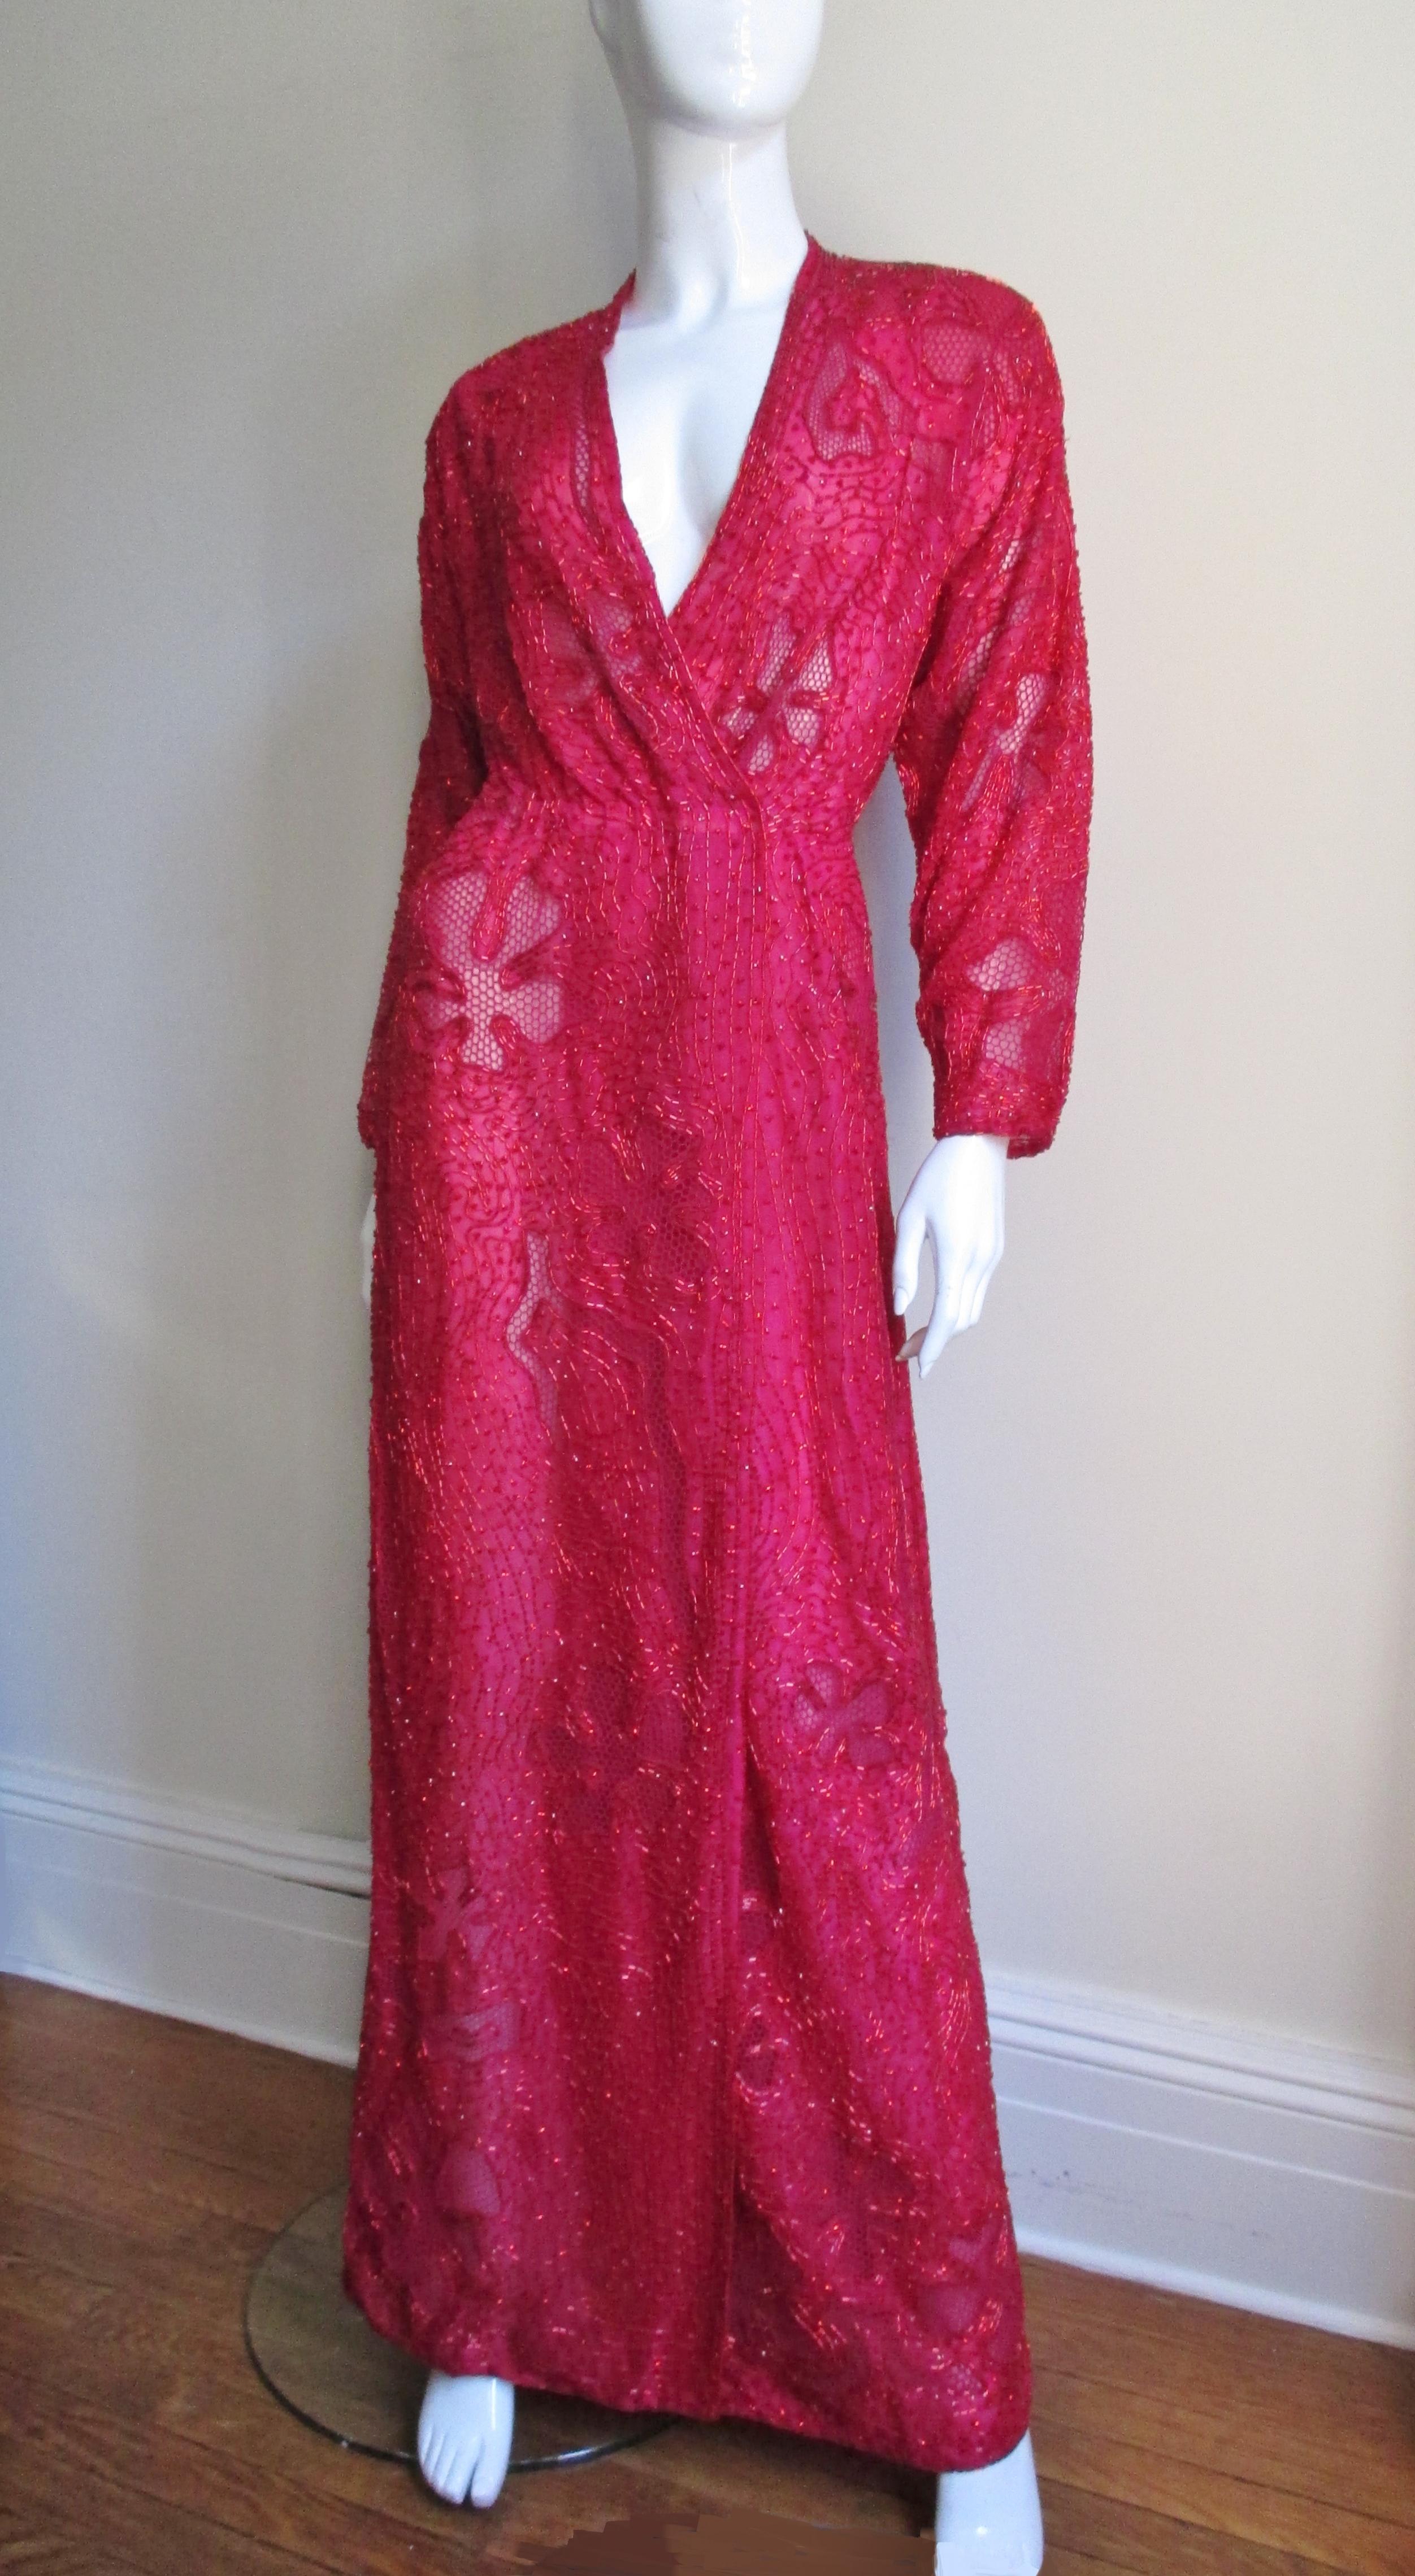 Halston 1970s Wrap Beaded Gown In Excellent Condition For Sale In Water Mill, NY